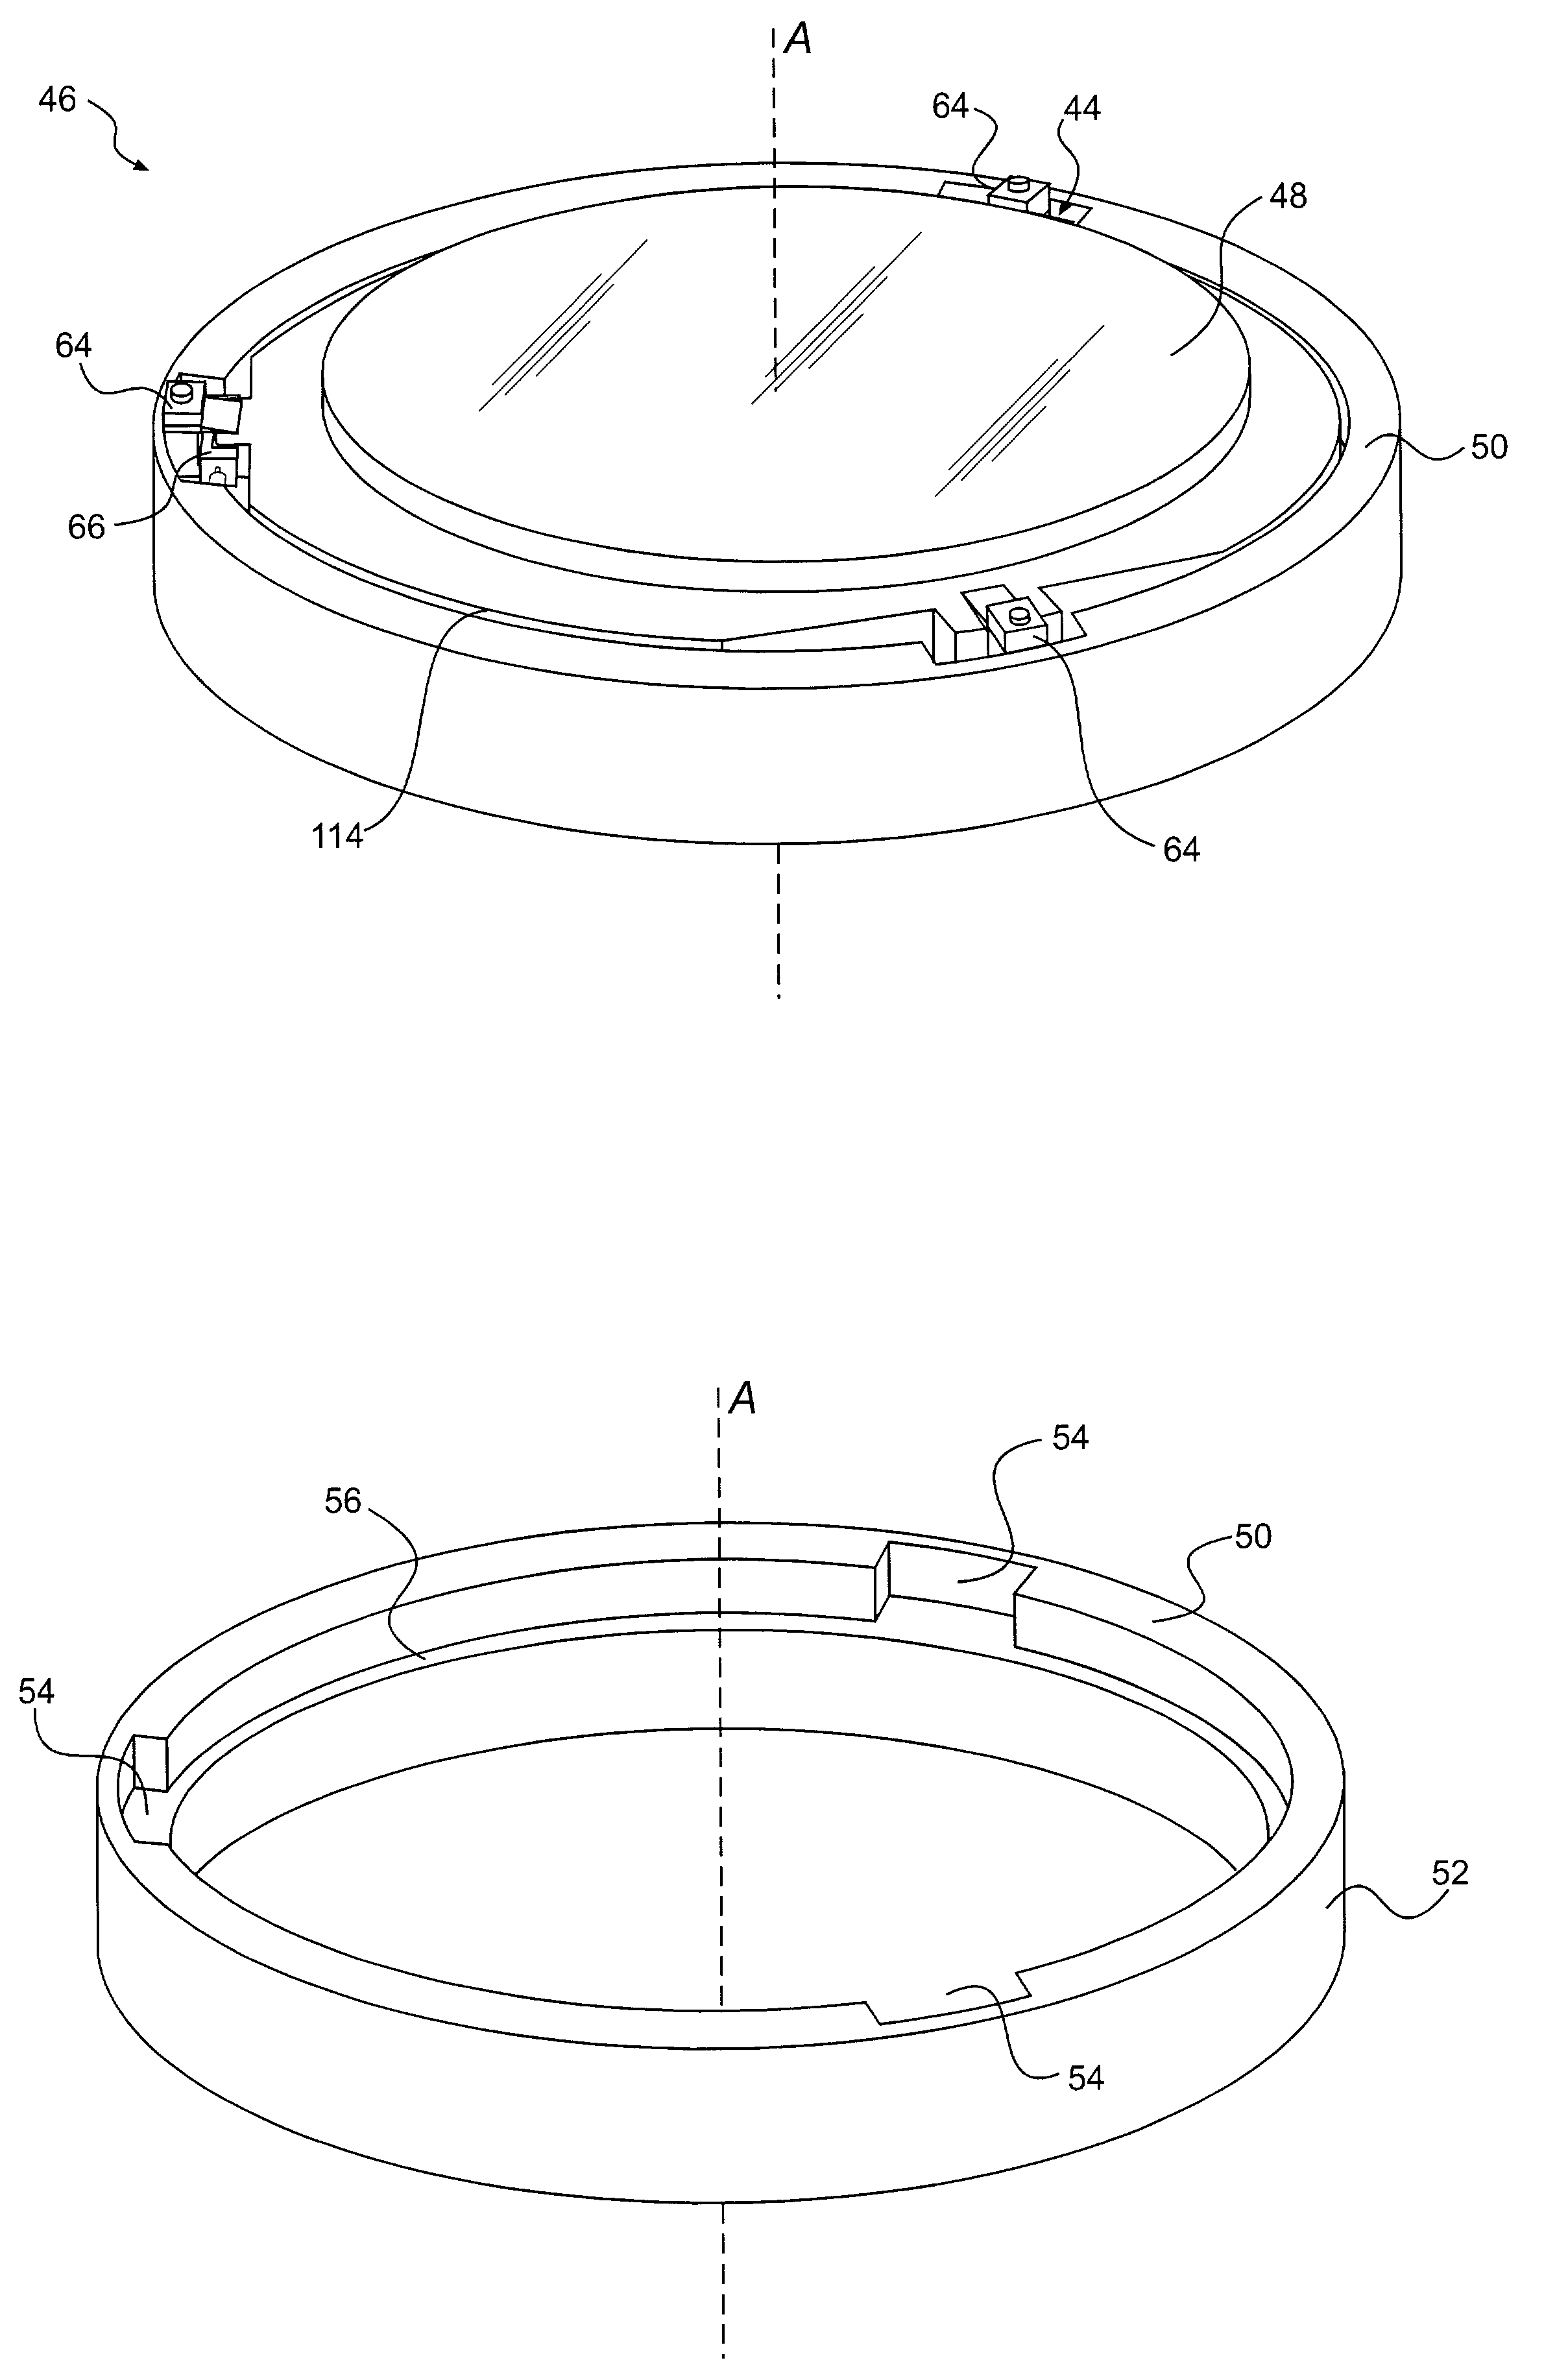 Kinematic optical mounting assembly with flexures